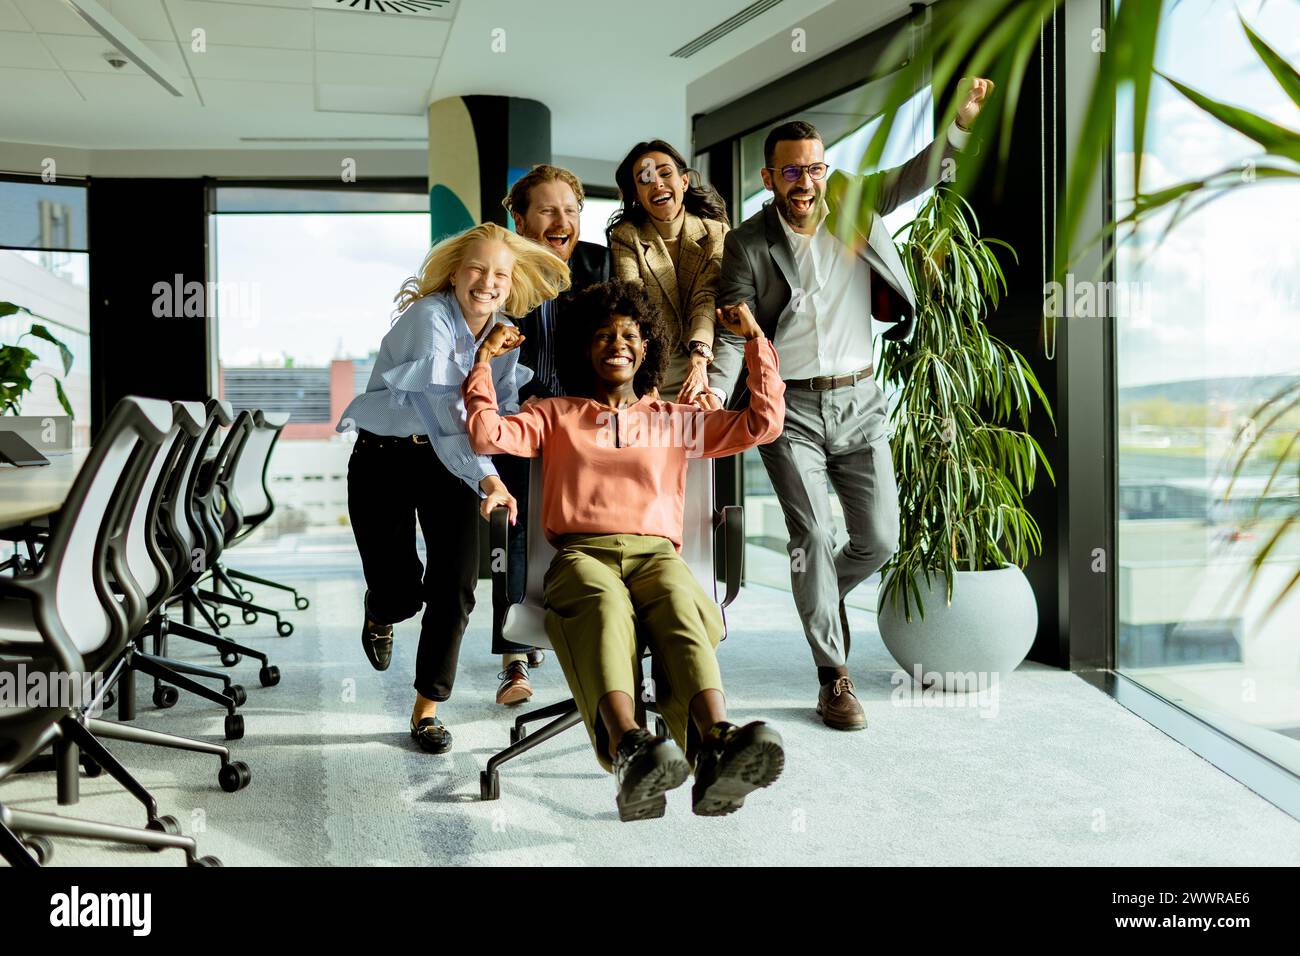 Team of coworkers shares a moment of fun, racing an office chair amidst a well-lit workspace. Stock Photo